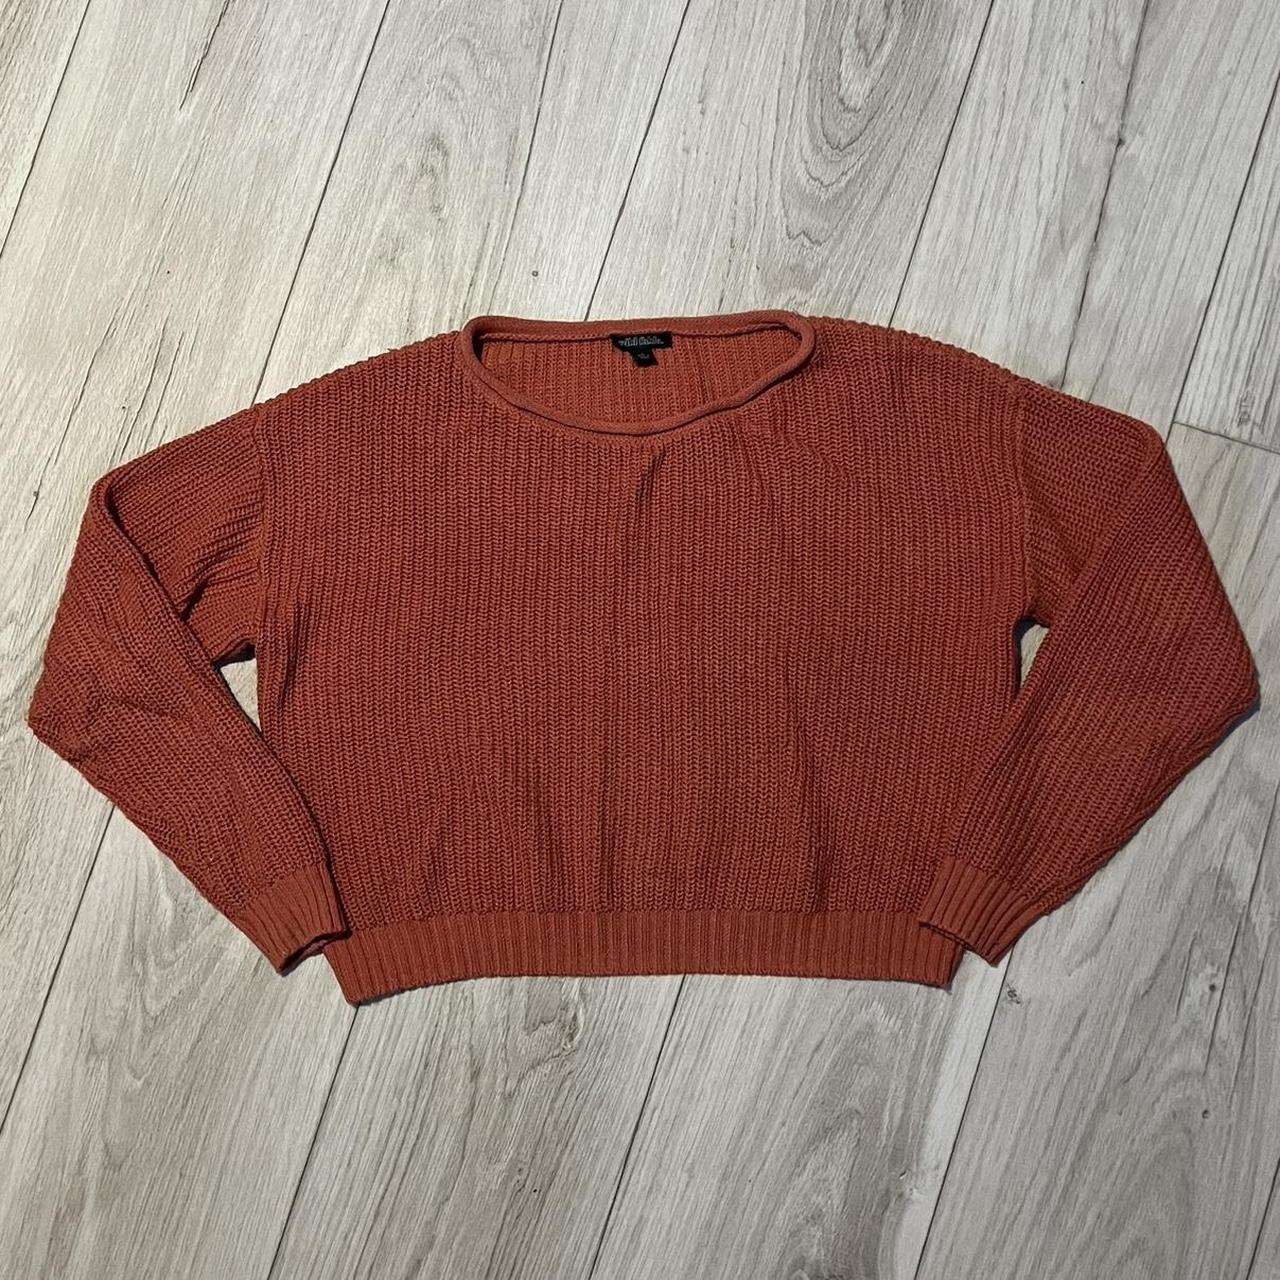 item listed by drippyflips